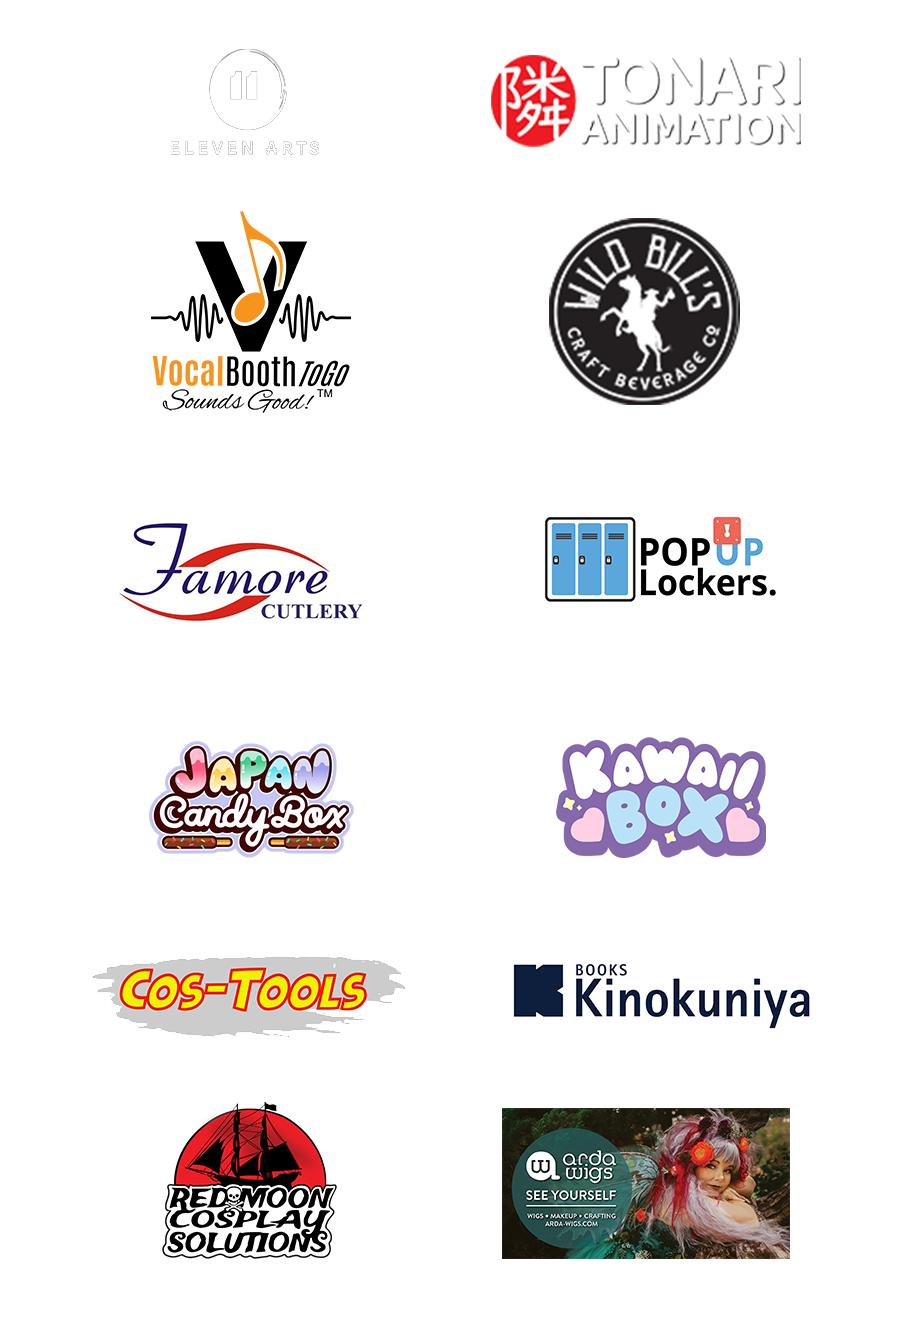 Check out our sponsors!